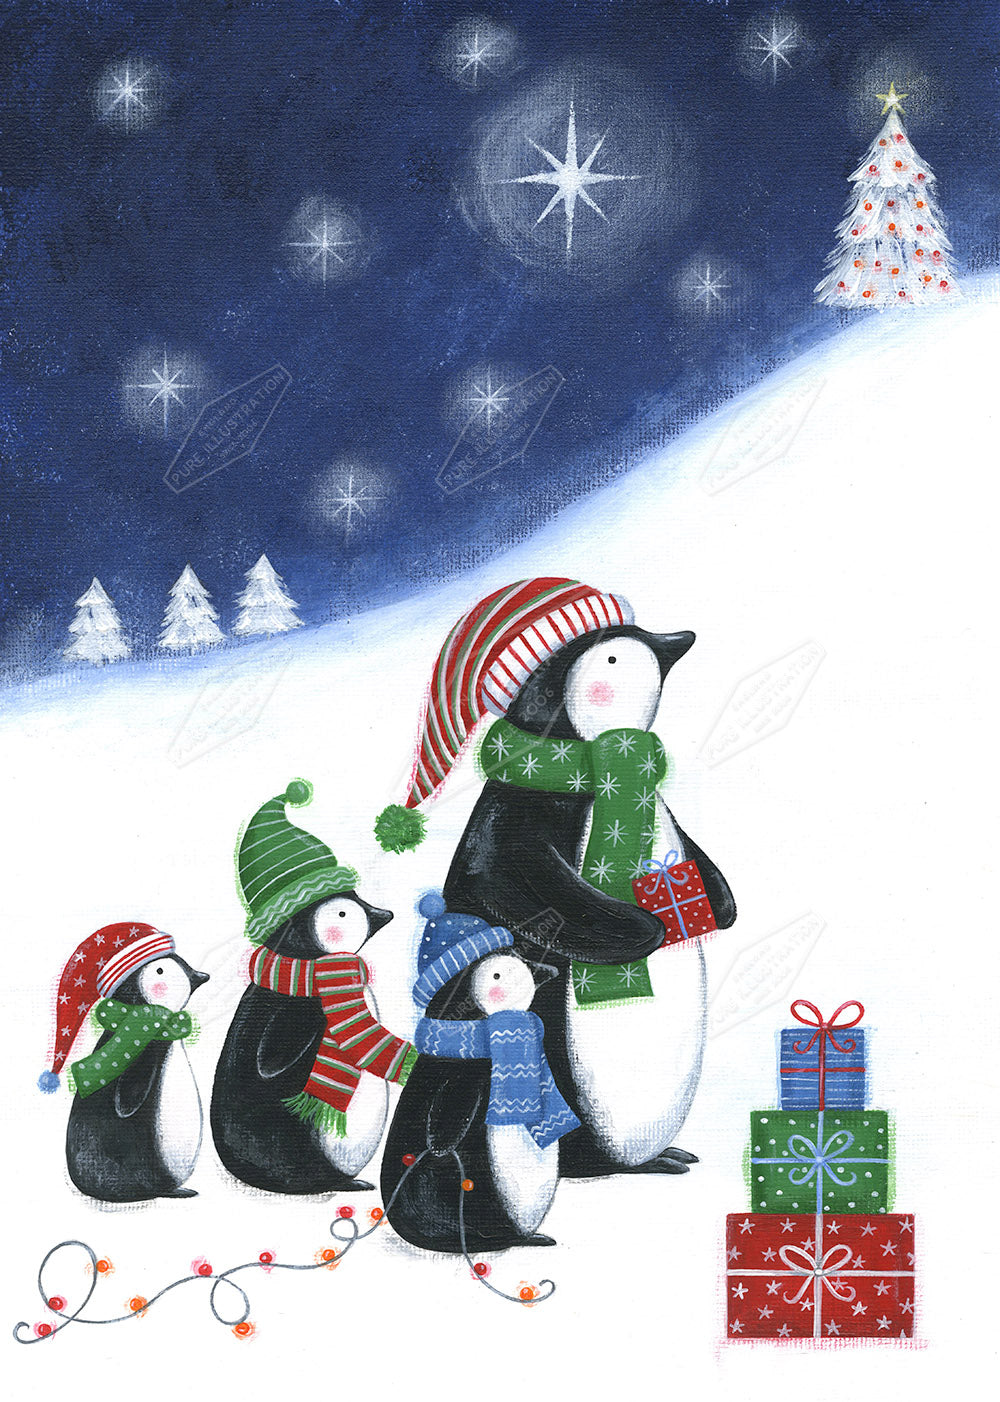 00028468AAI - Penguins following Star by Anna Aitken - Pure Art Licensing Agency